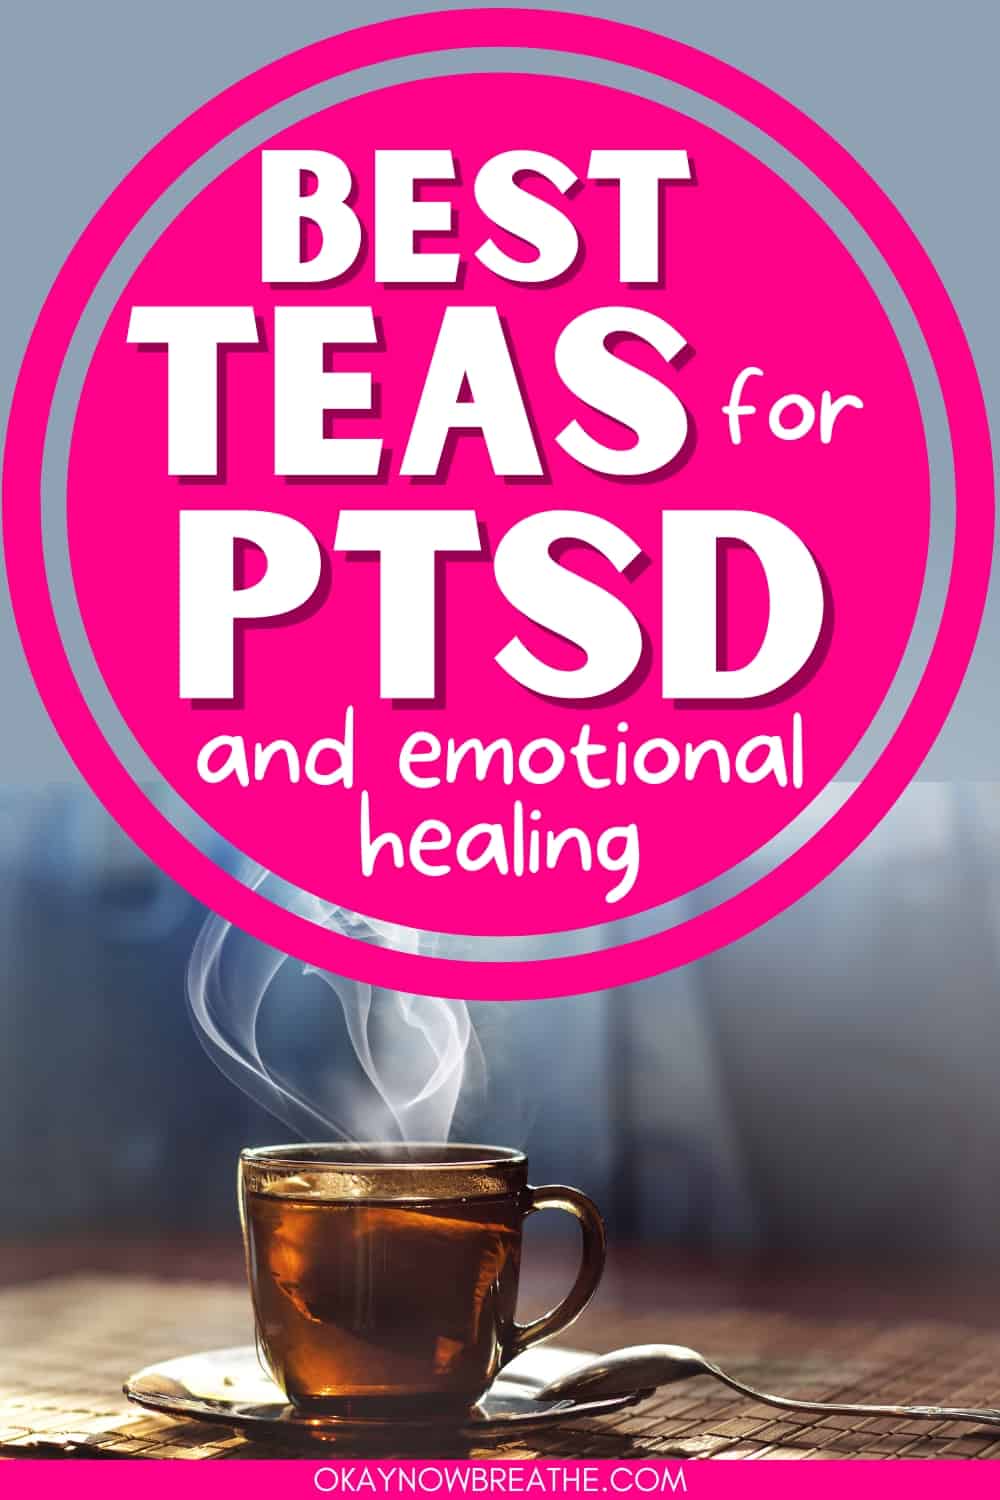 There is a cup of steaming hot tea. Above, there is text: best teas for PTSD and emotional healing.